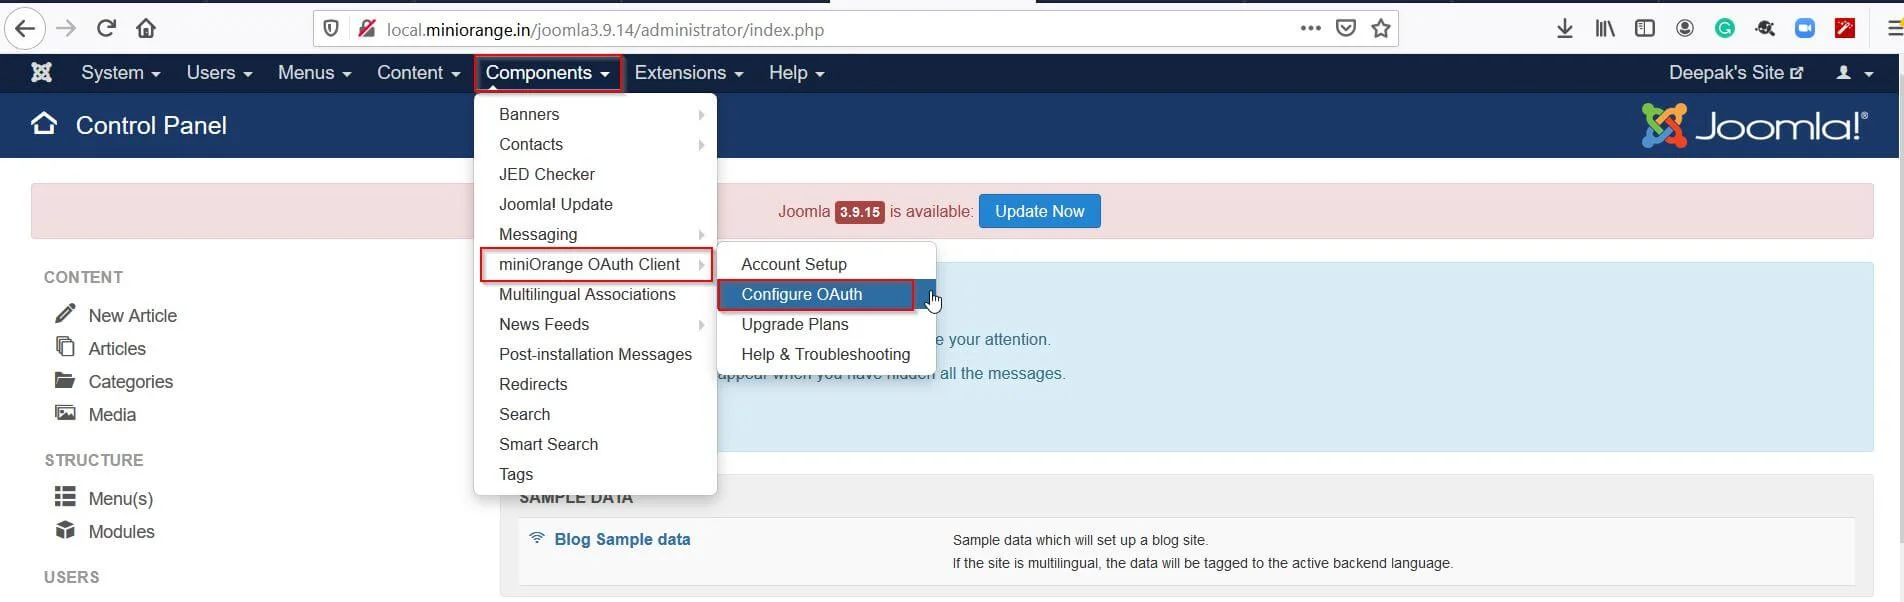  Joomla Oauth / OpenID Connect Single Sign-on SSO for Joomla - App Client Configuration